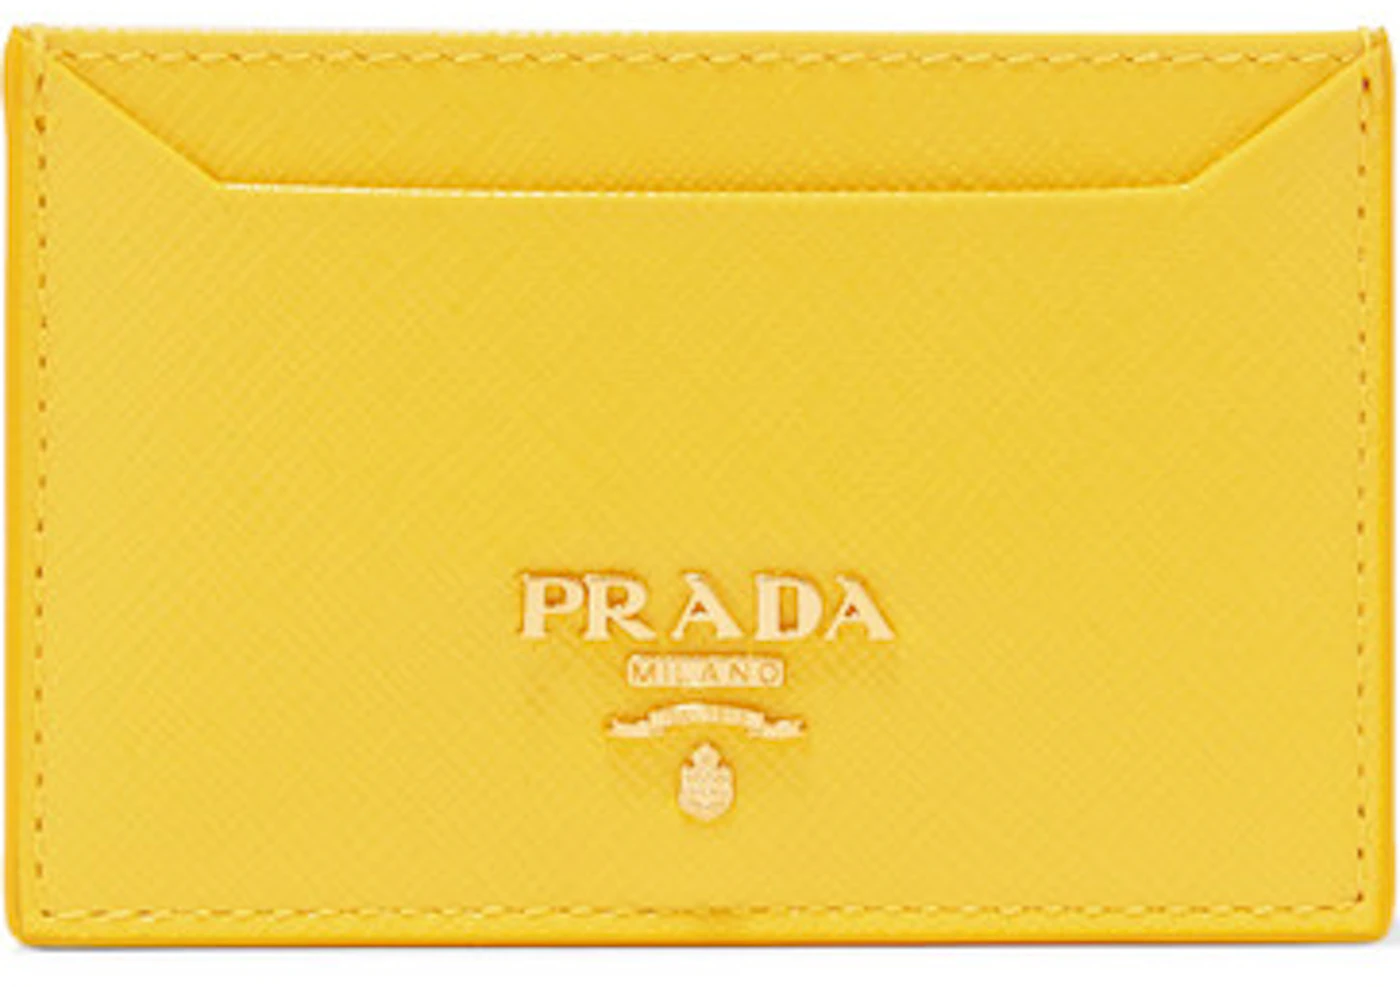 Prada Metal Oro Card Case Saffiano Yellow in Leather with Goldtone - US